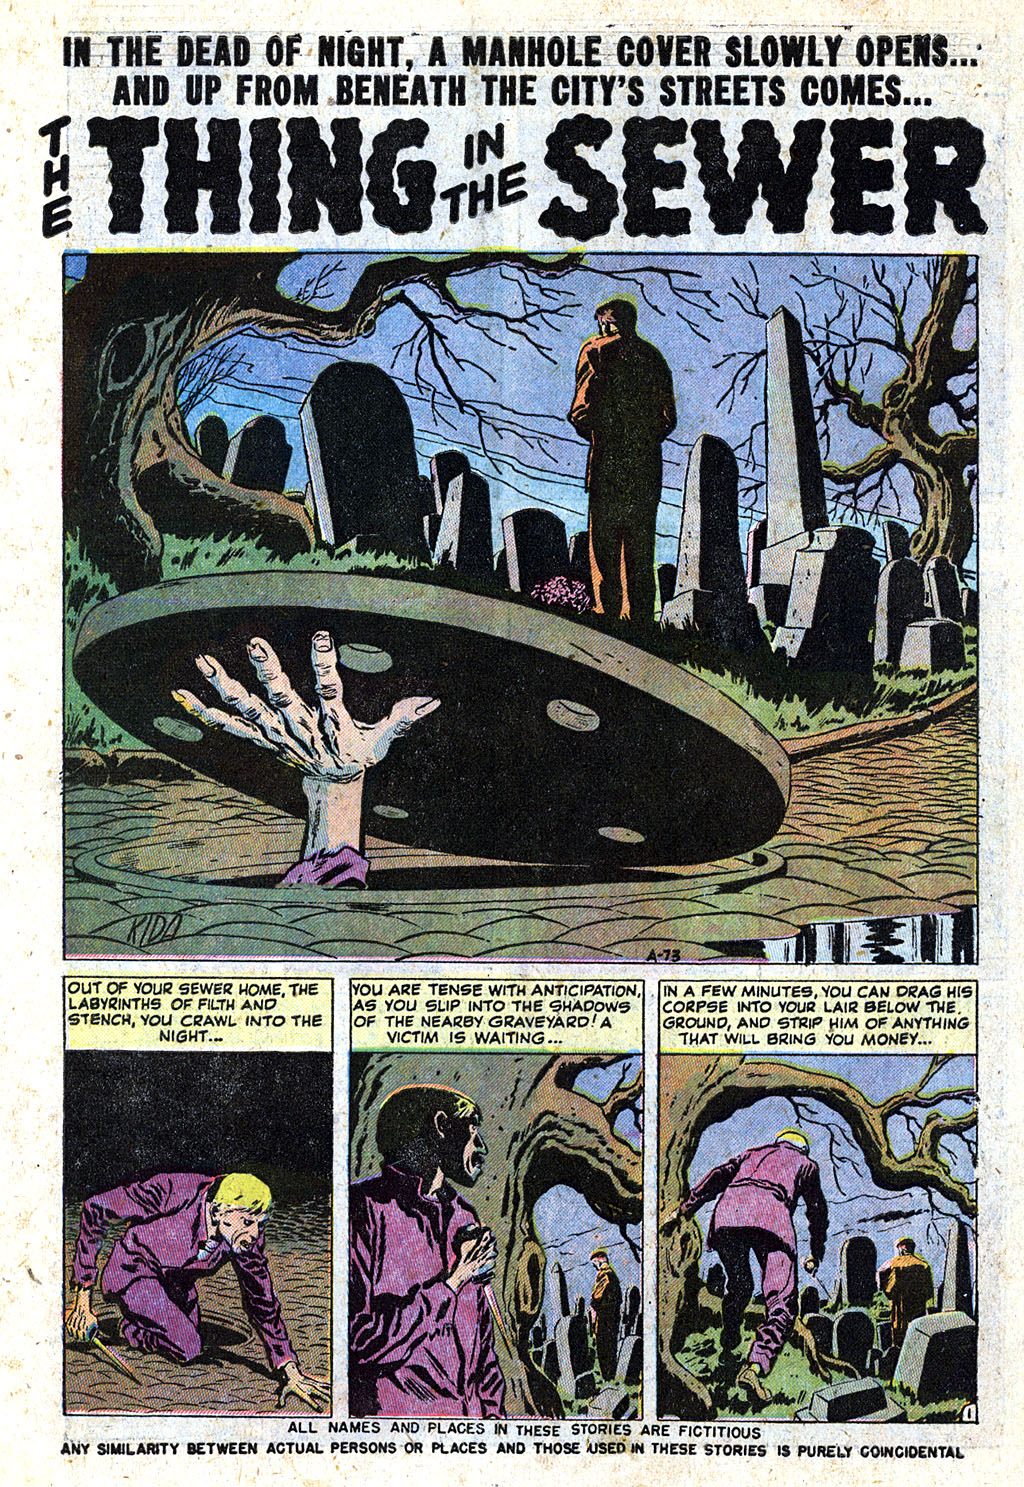 Marvel Tales (1949) 107 Page 2